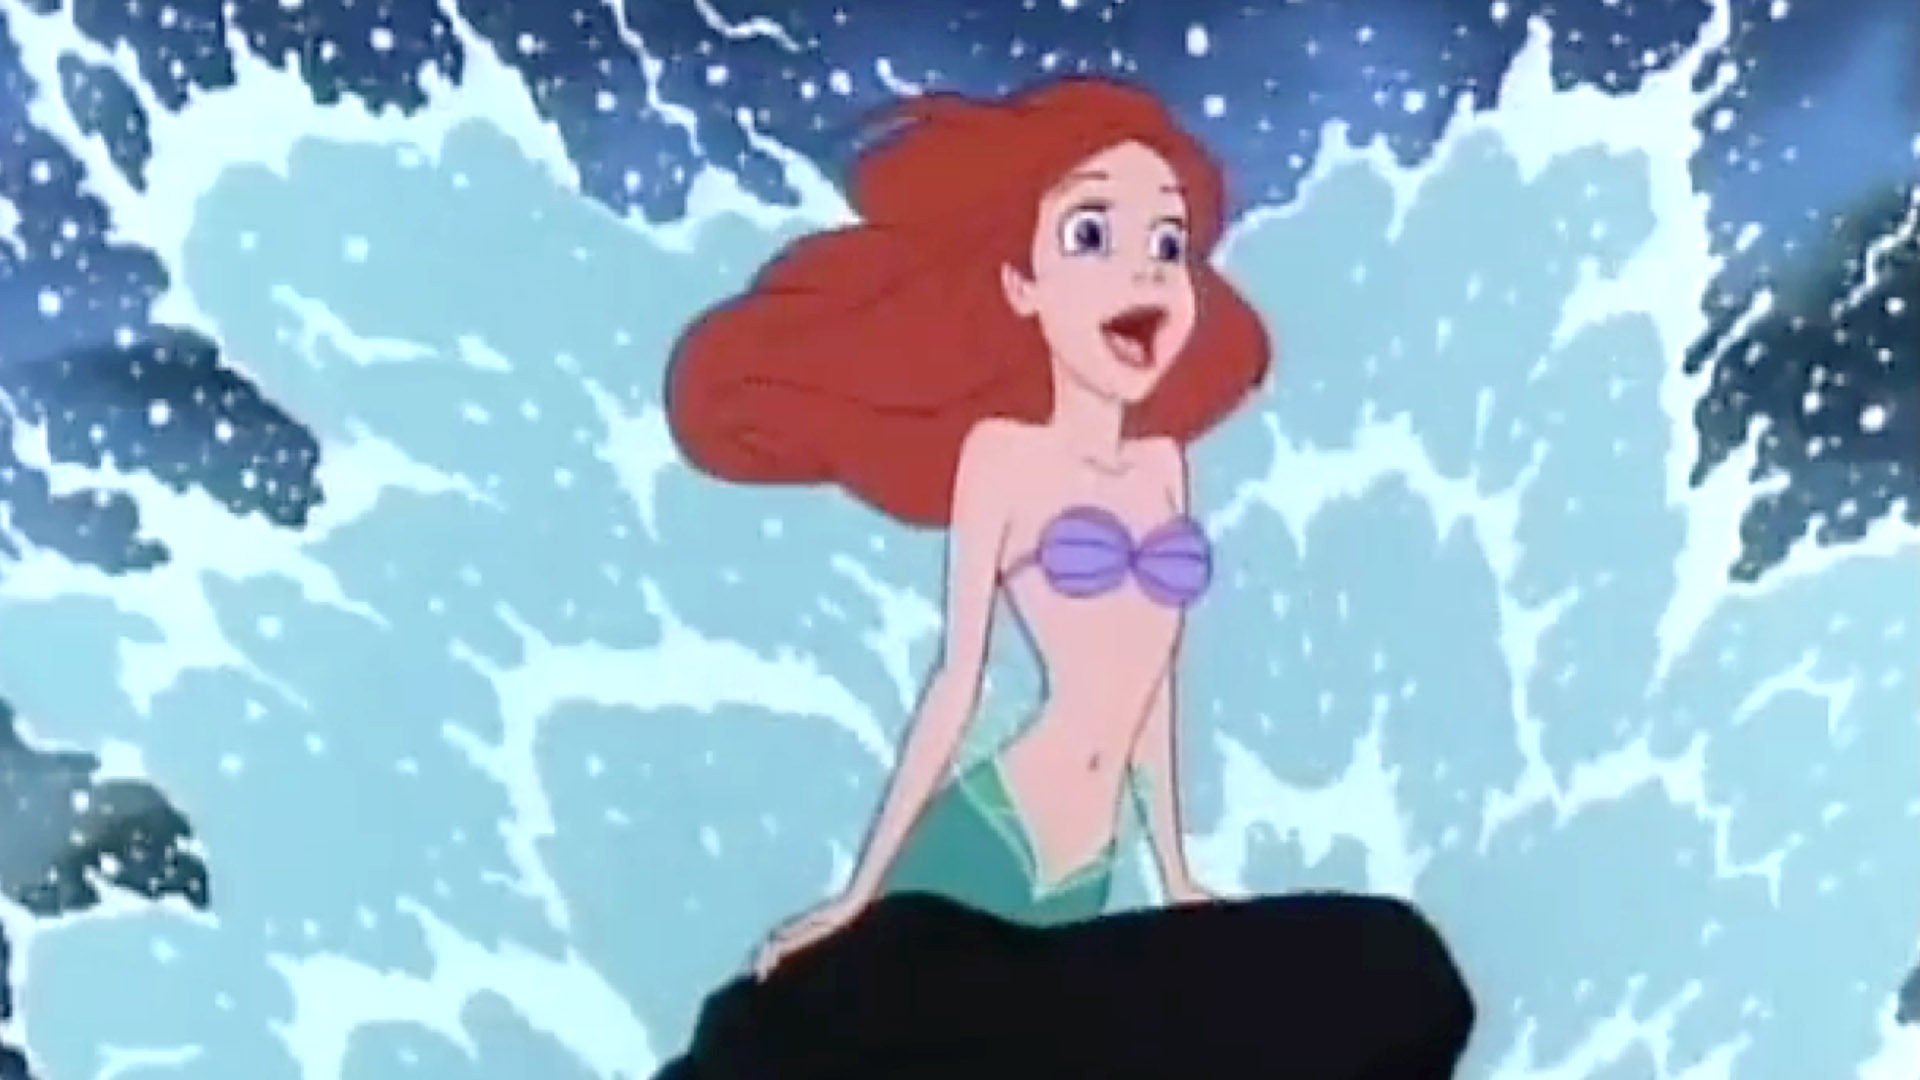 The Little Mermaid Trailer 1 Trailers & Videos Rotten Tomatoes